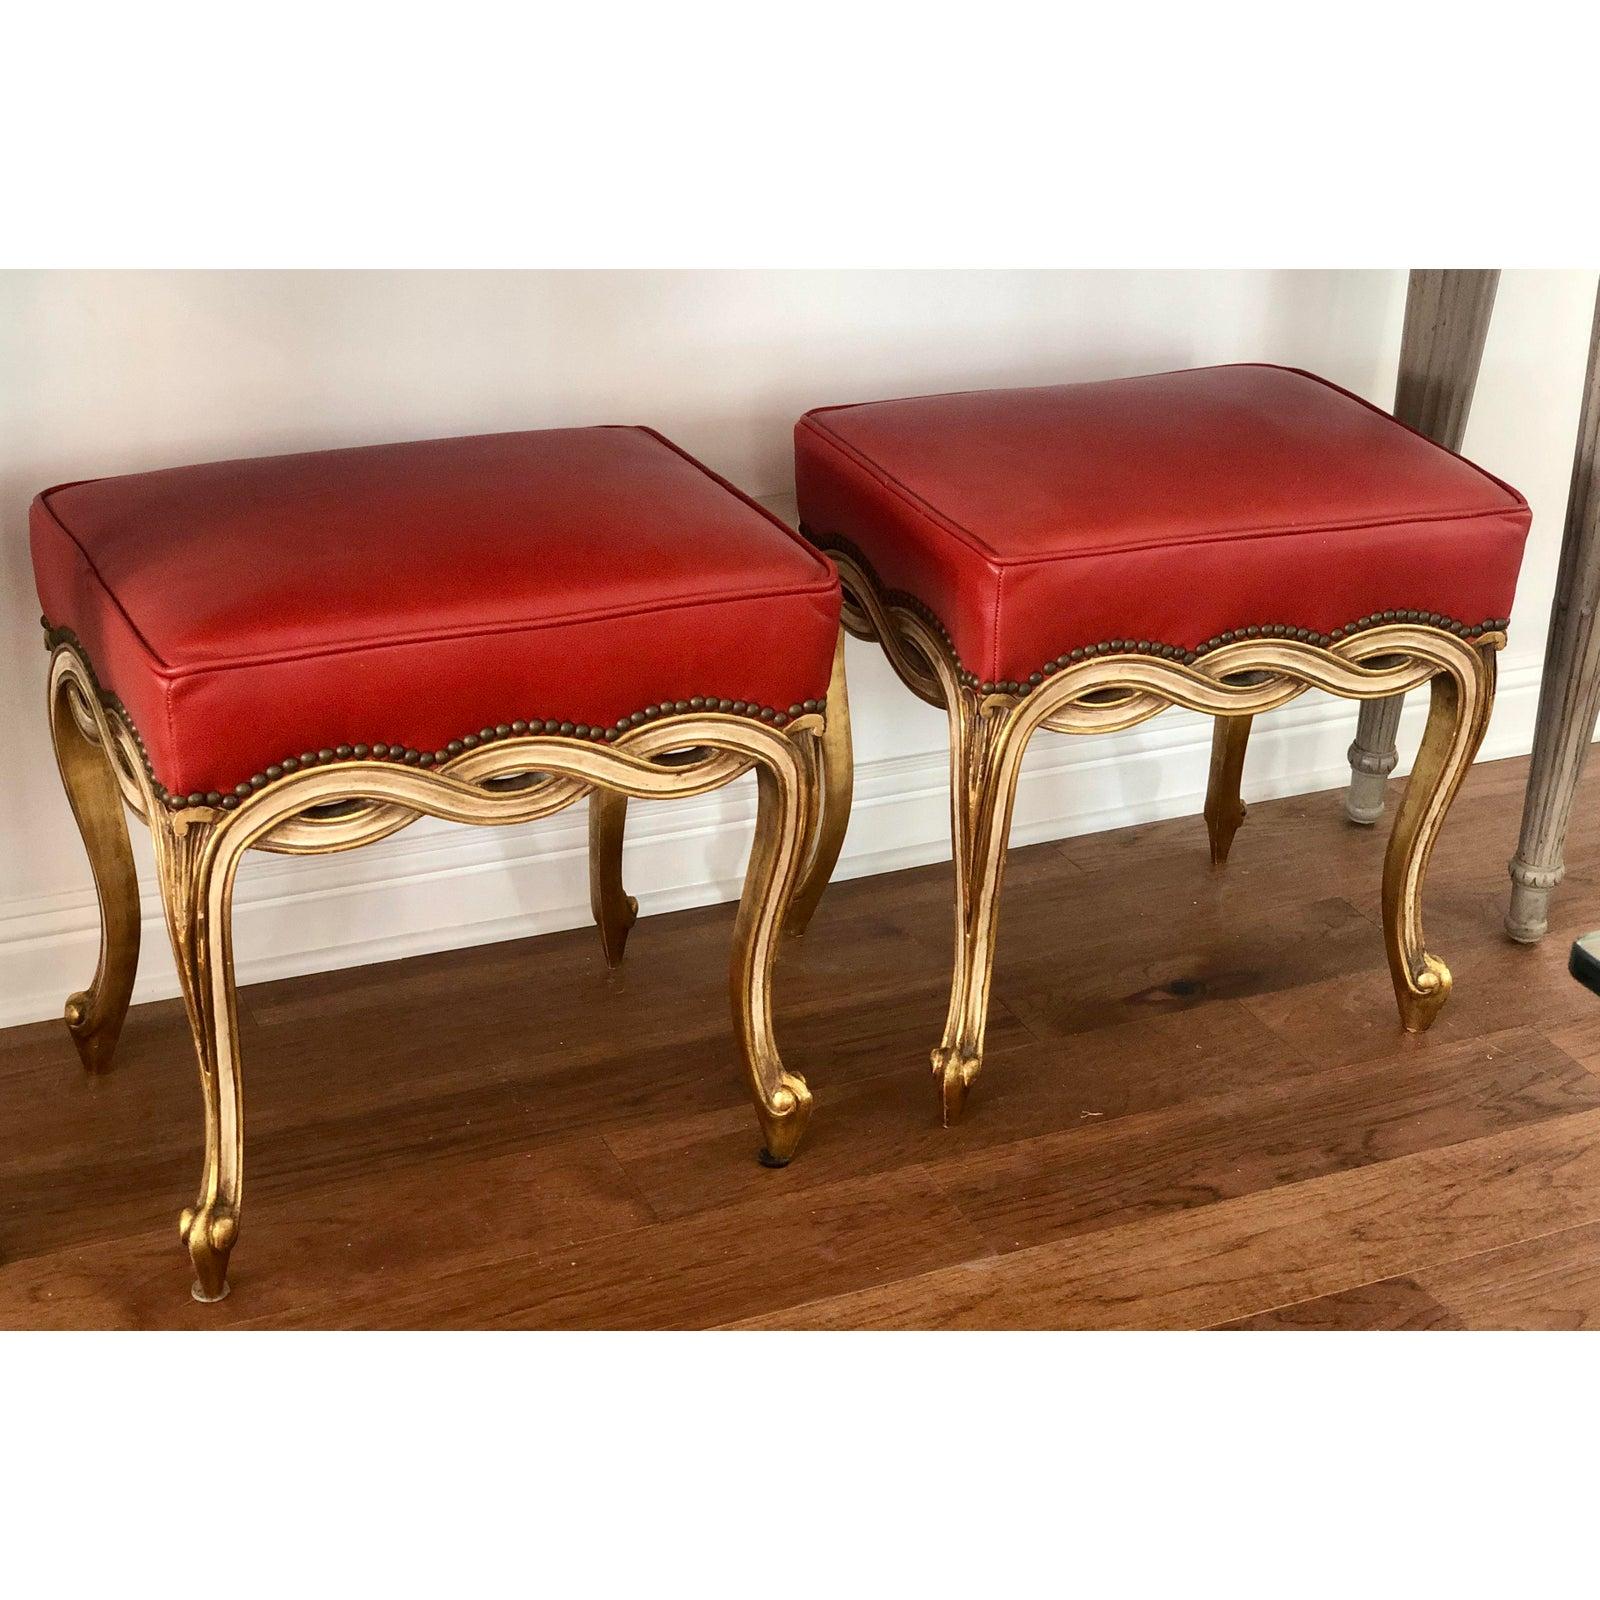 Pair of Regency Style Giltwood Taboret Benches by Randy Esada Designs for Prospr In Good Condition For Sale In LOS ANGELES, CA